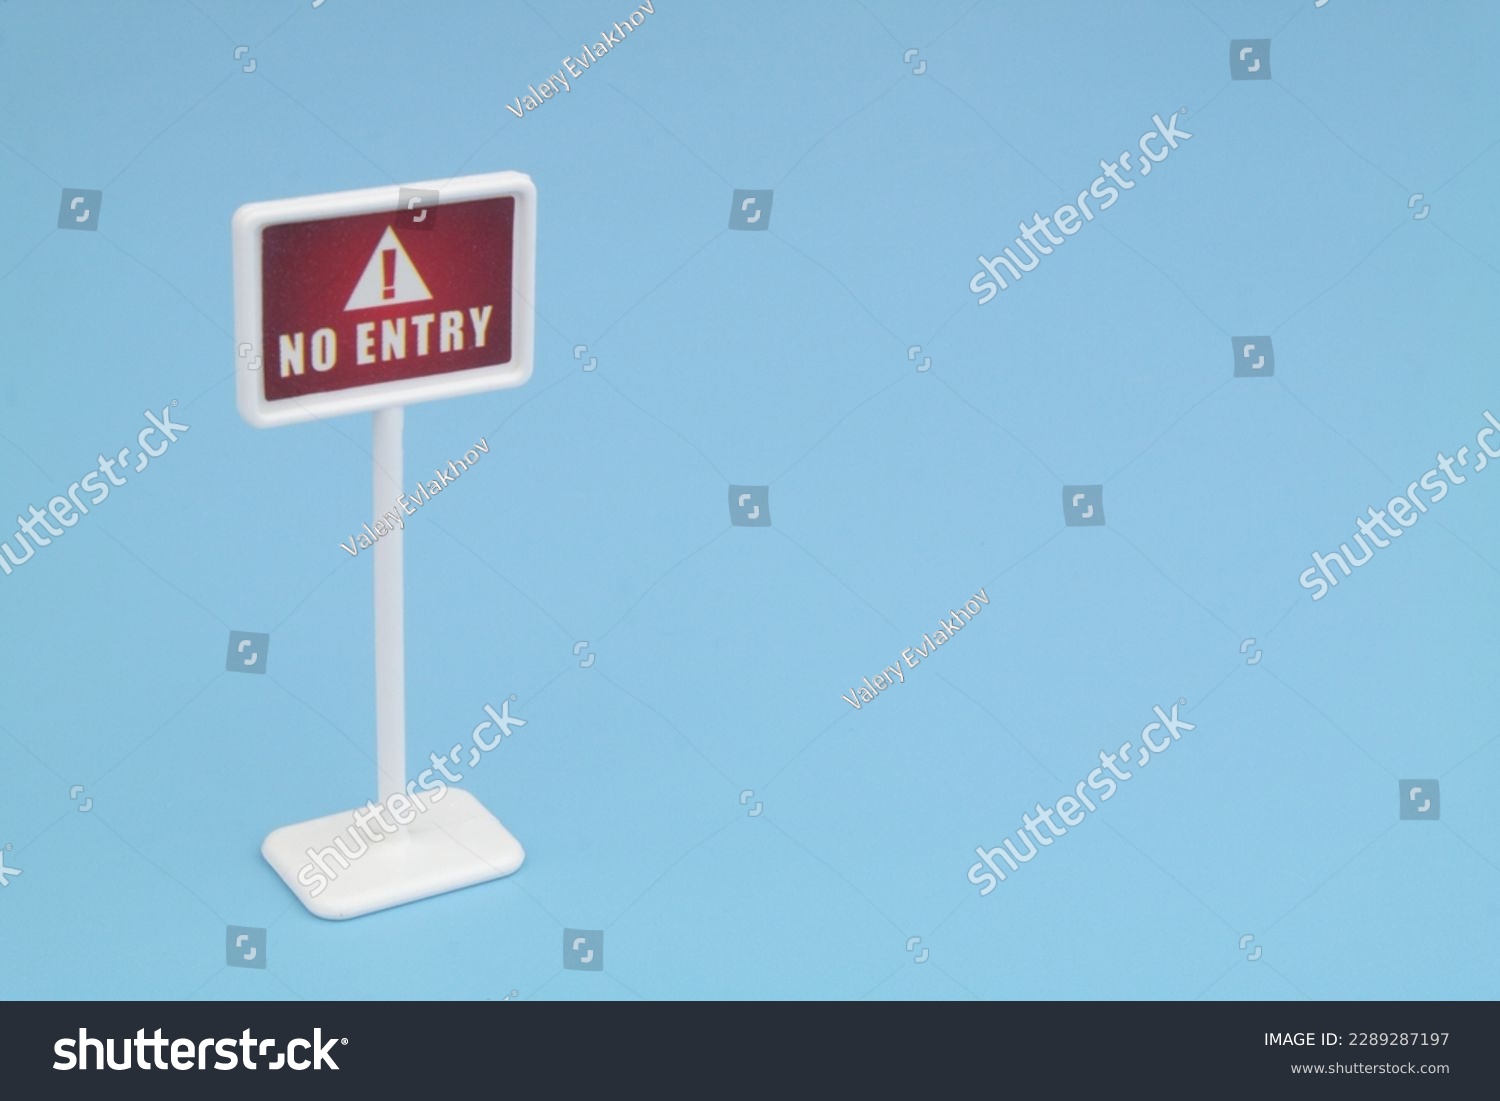 No entry warning sign on blue background with space for text. #2289287197